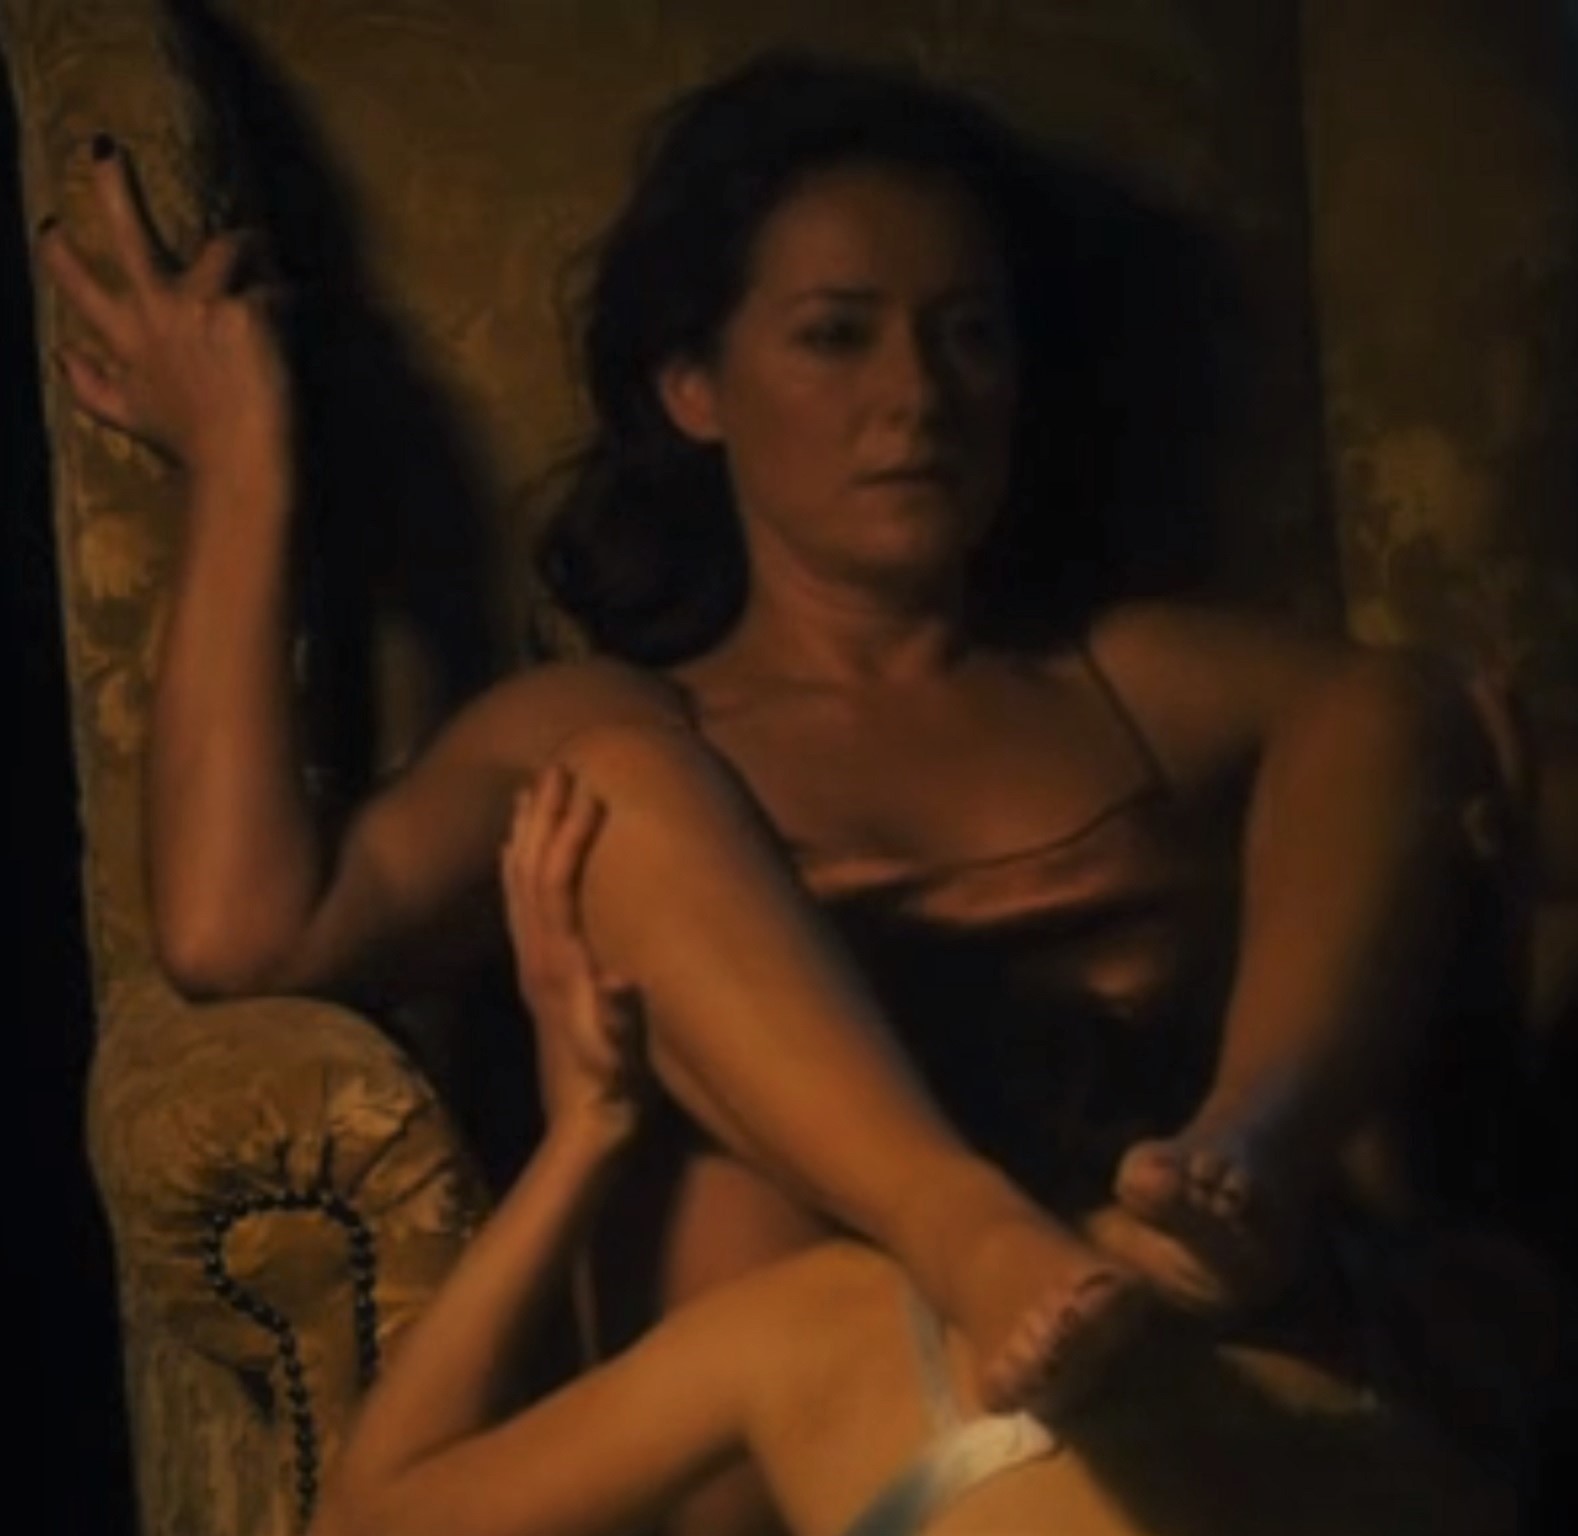 People who liked Sidse Babett Knudsen's feet, also liked.